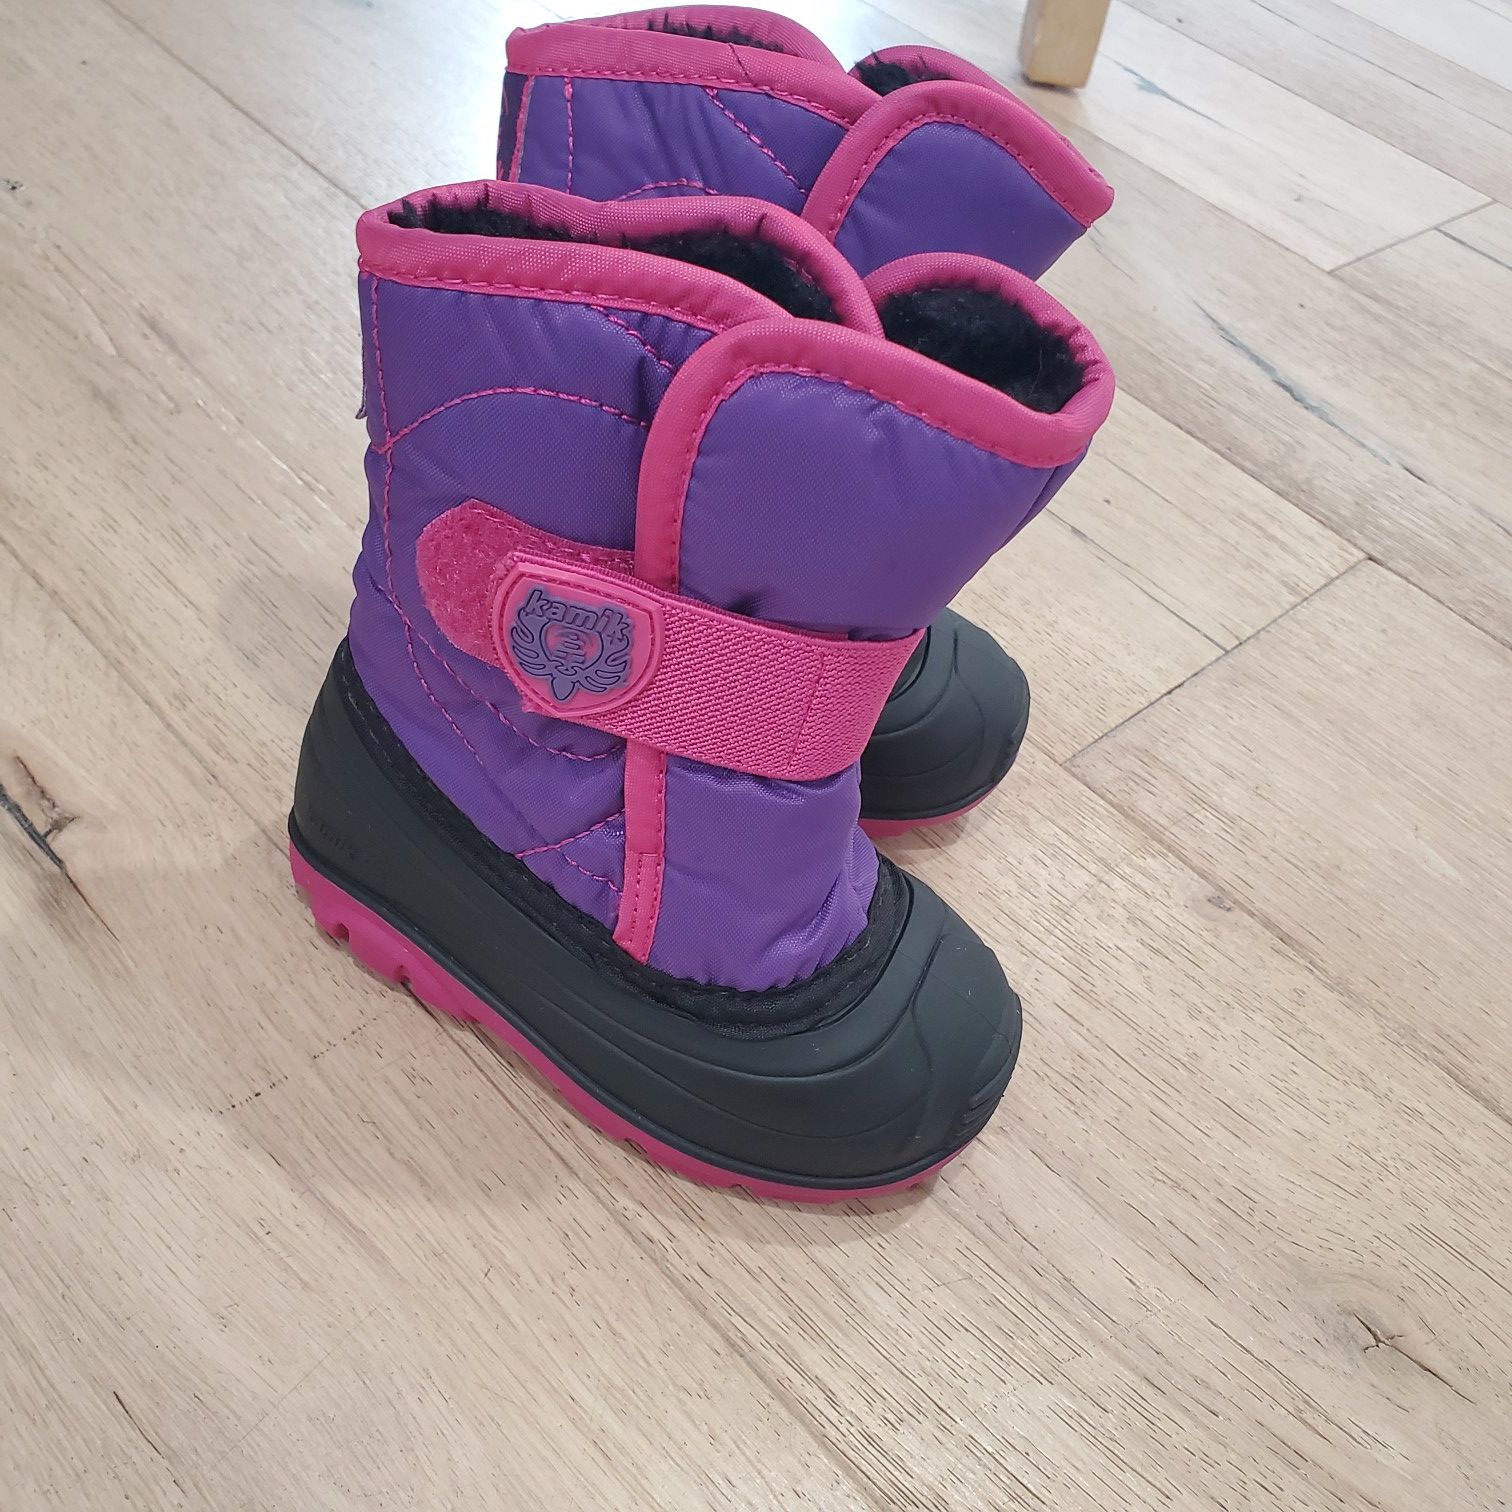 Baby girl Kamik snow boots size 6 toddler